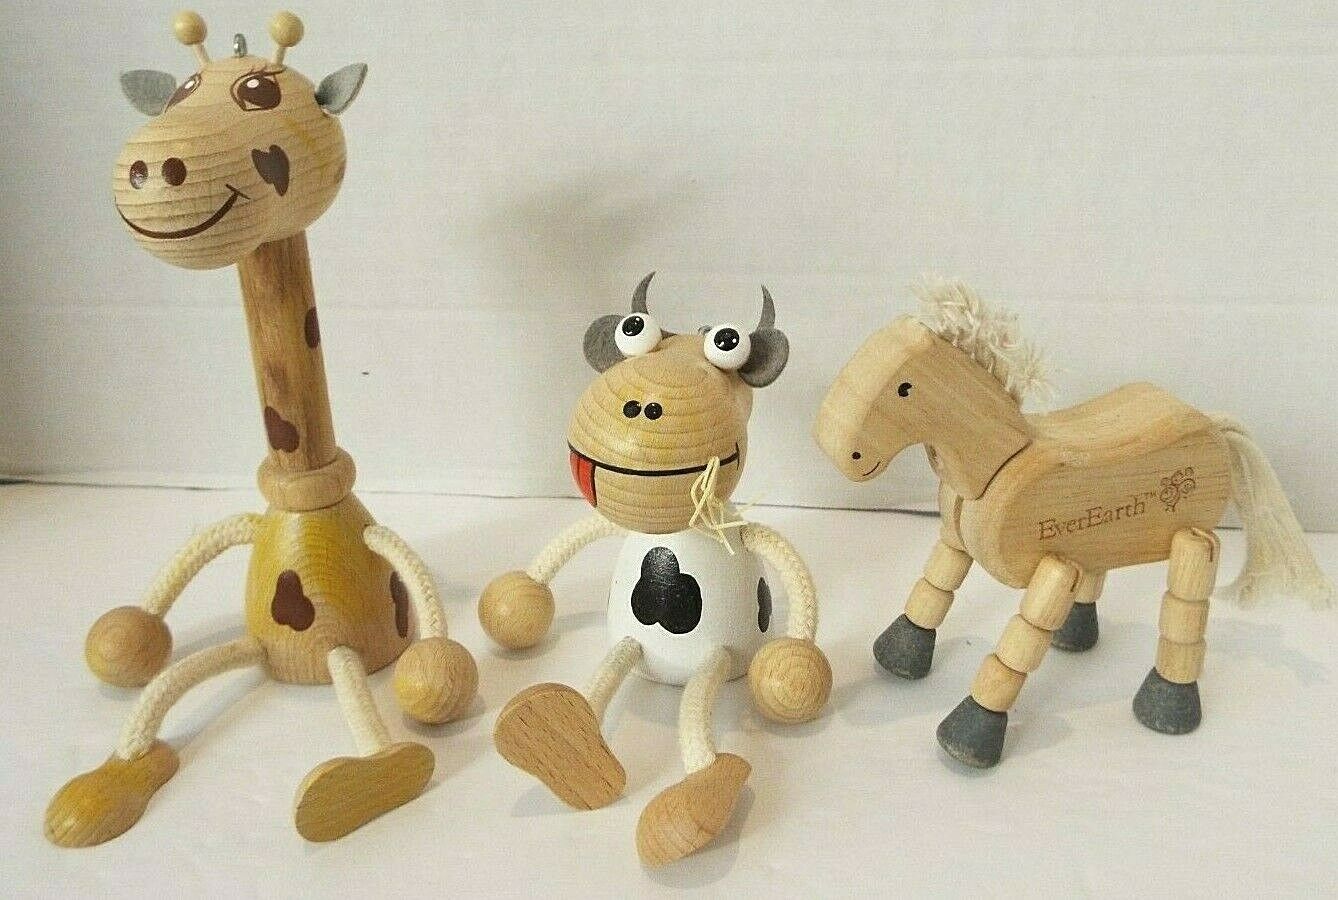 Wood Toy Animals Cow Giraffe Horse Ever Earth 4.5" To 7" Tall